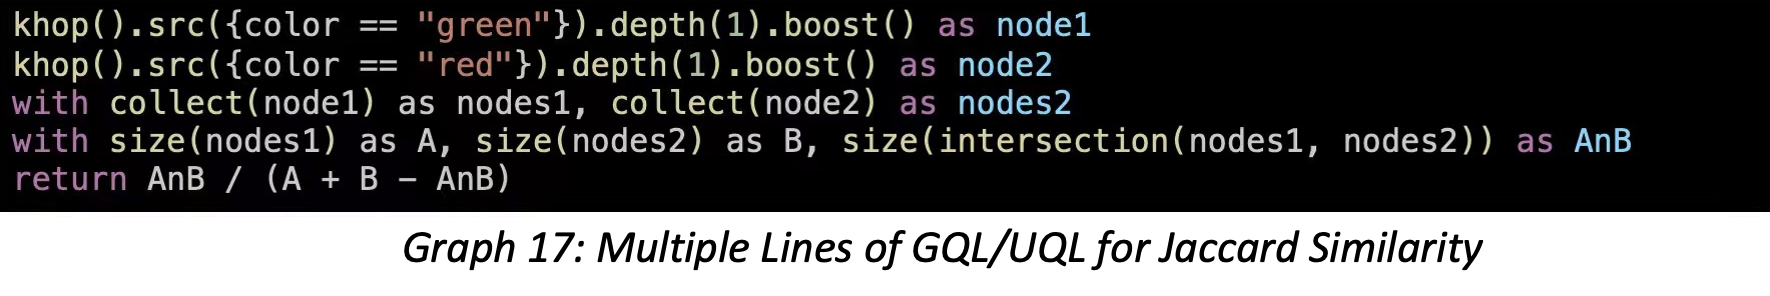 Multiple Lines of GQL/UQL for Jaccard Similarity.